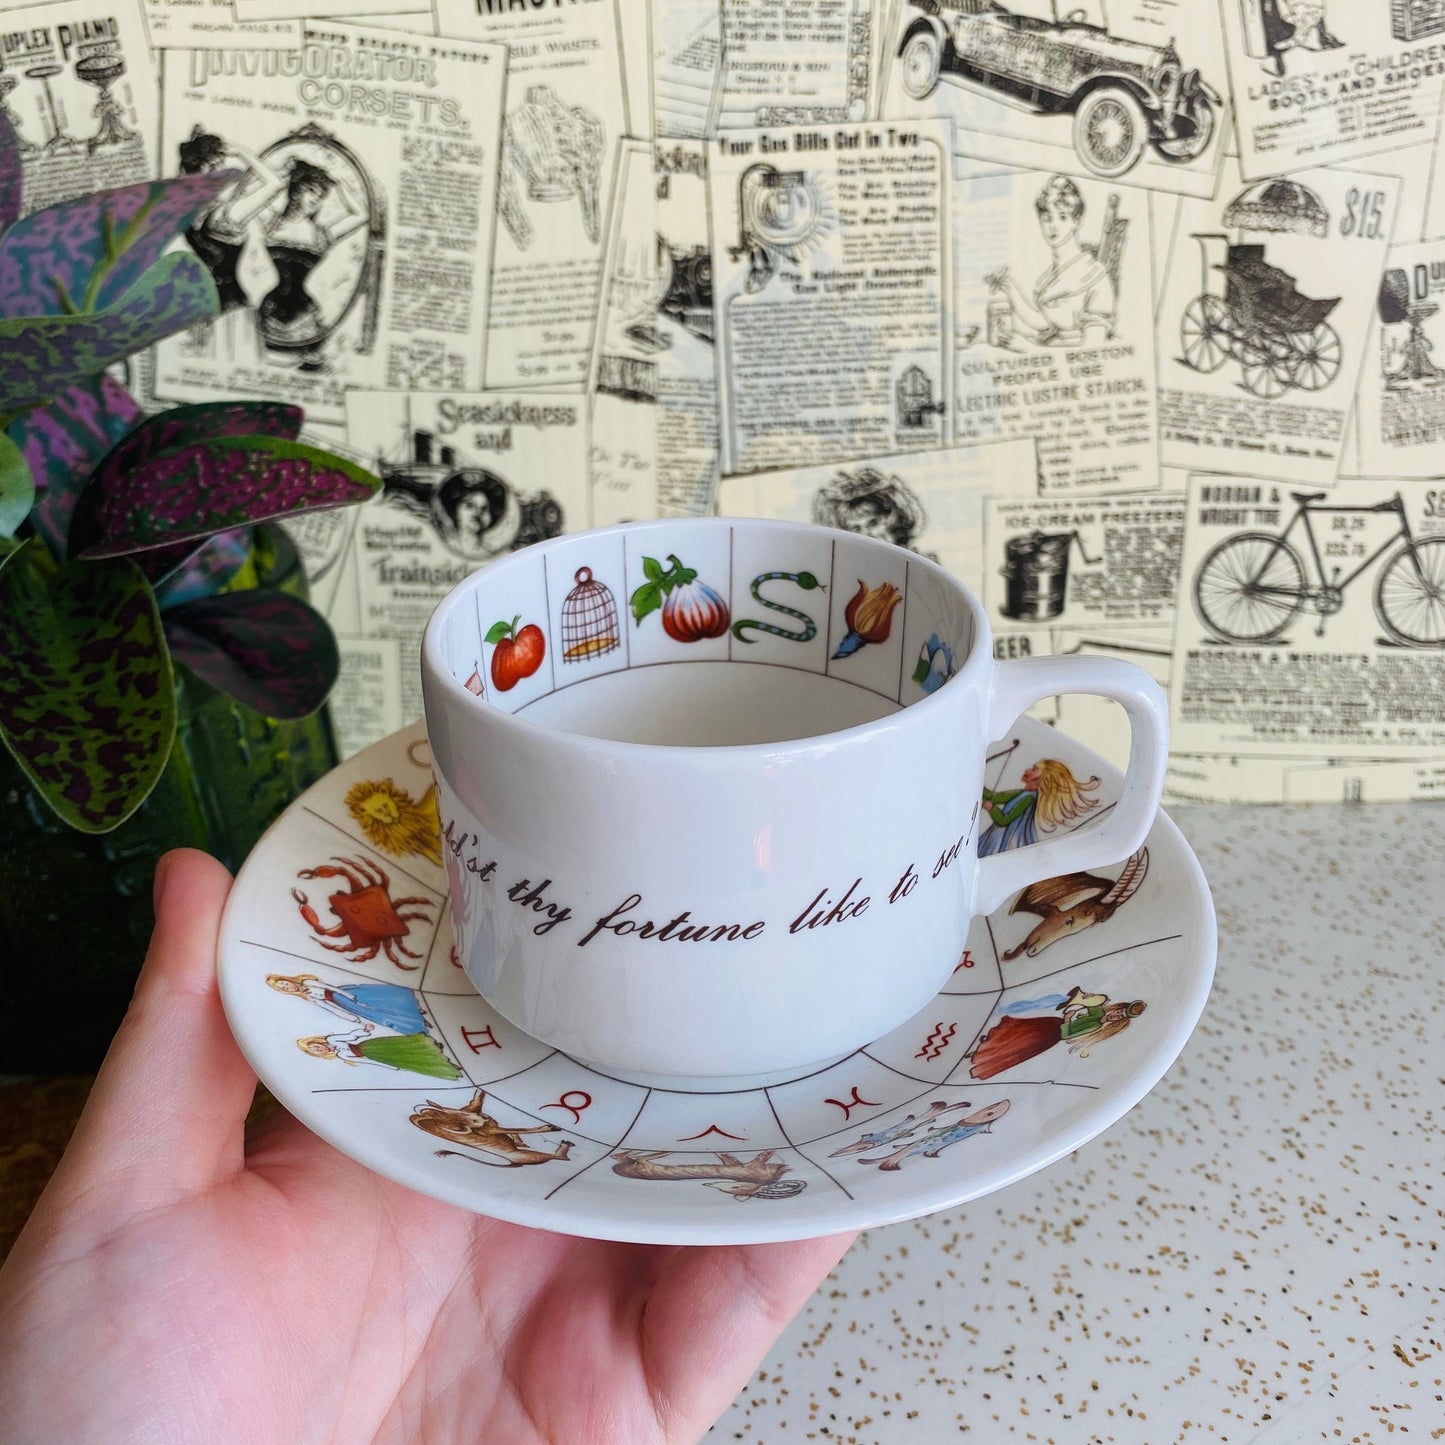 Vintage Royal Kendal fortune telling teacup. Colorful tea cup and saucer set for tea leaf reading with astrology and zodiac symbols design.